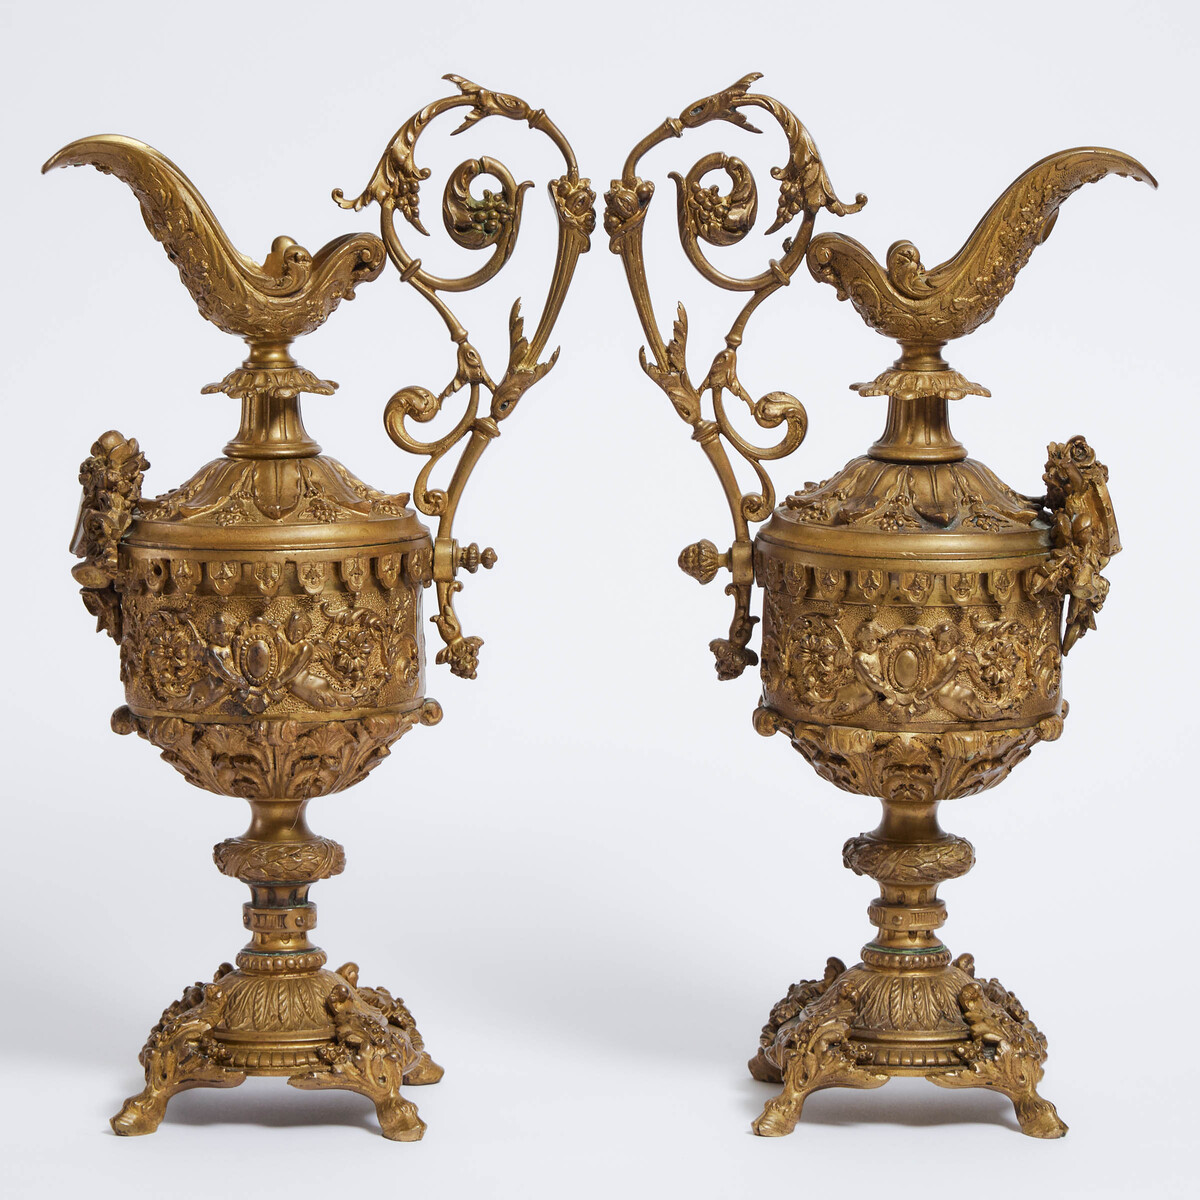 Pair of French Belle Epoque Bronze Ewers, early 20th century, each height 16 in — 40.6 cm (2 Pieces) - Image 2 of 2